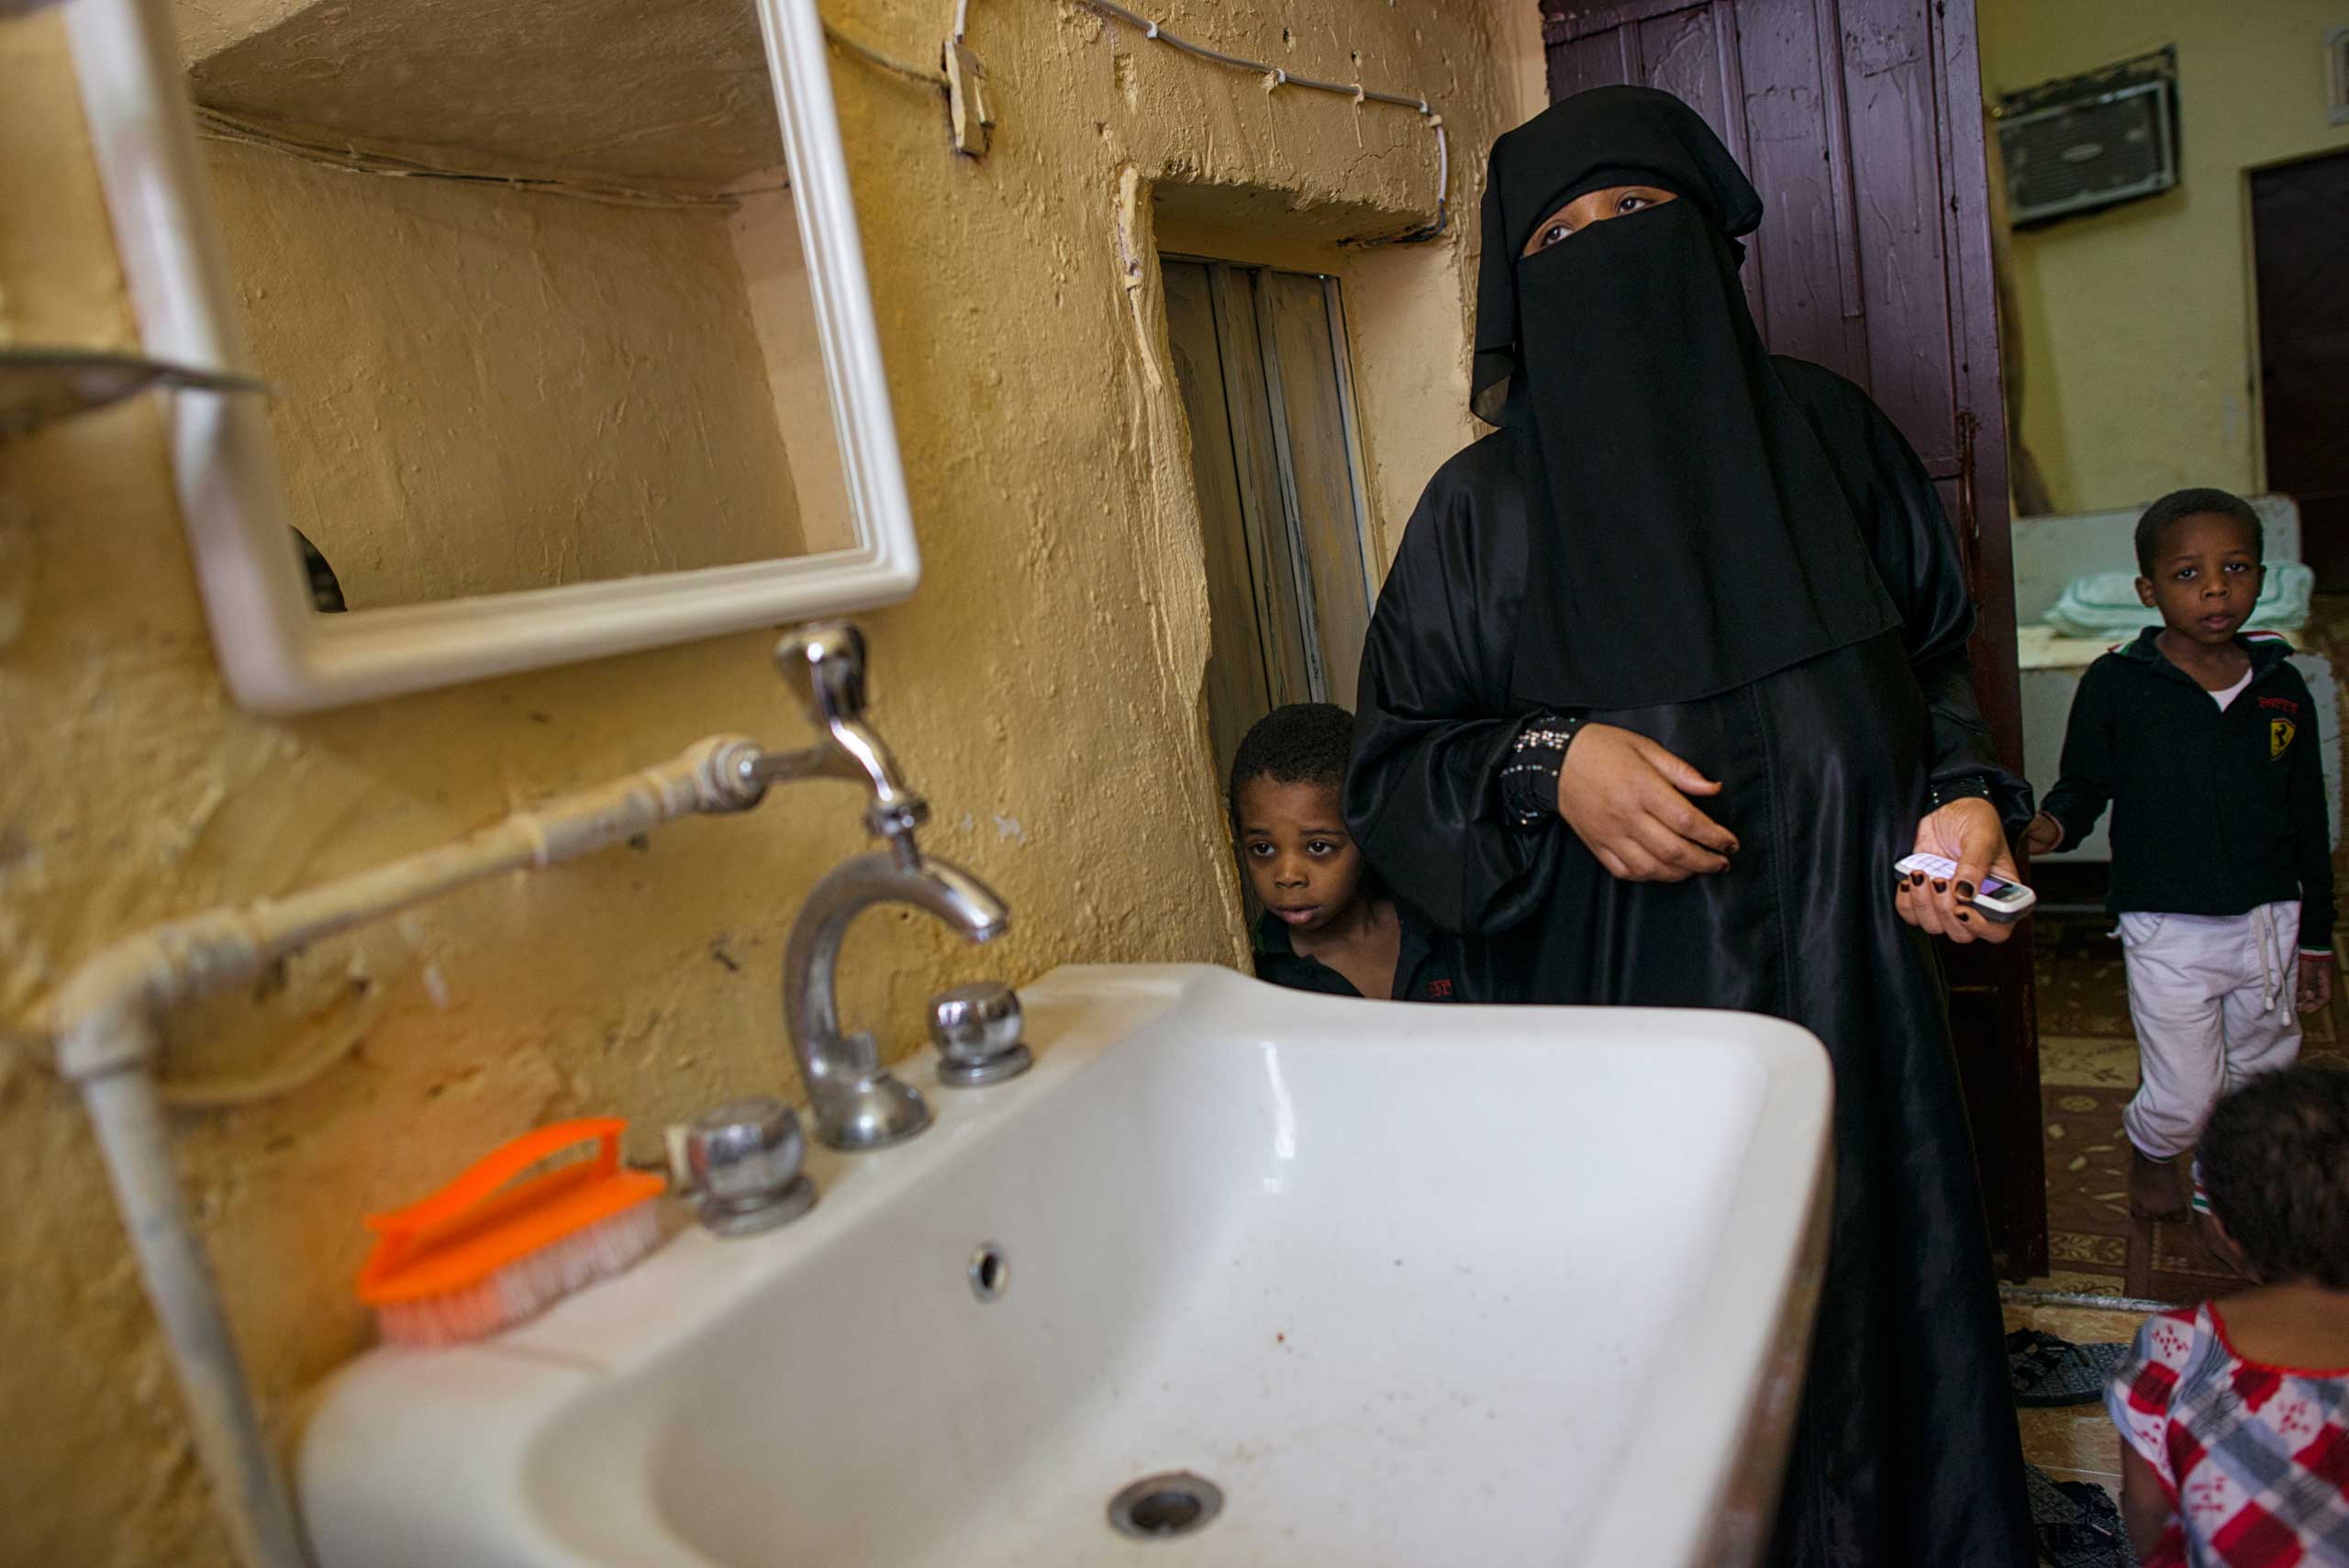 Matara stands with her two boys next to a sink without water in her home in South Riyadh.